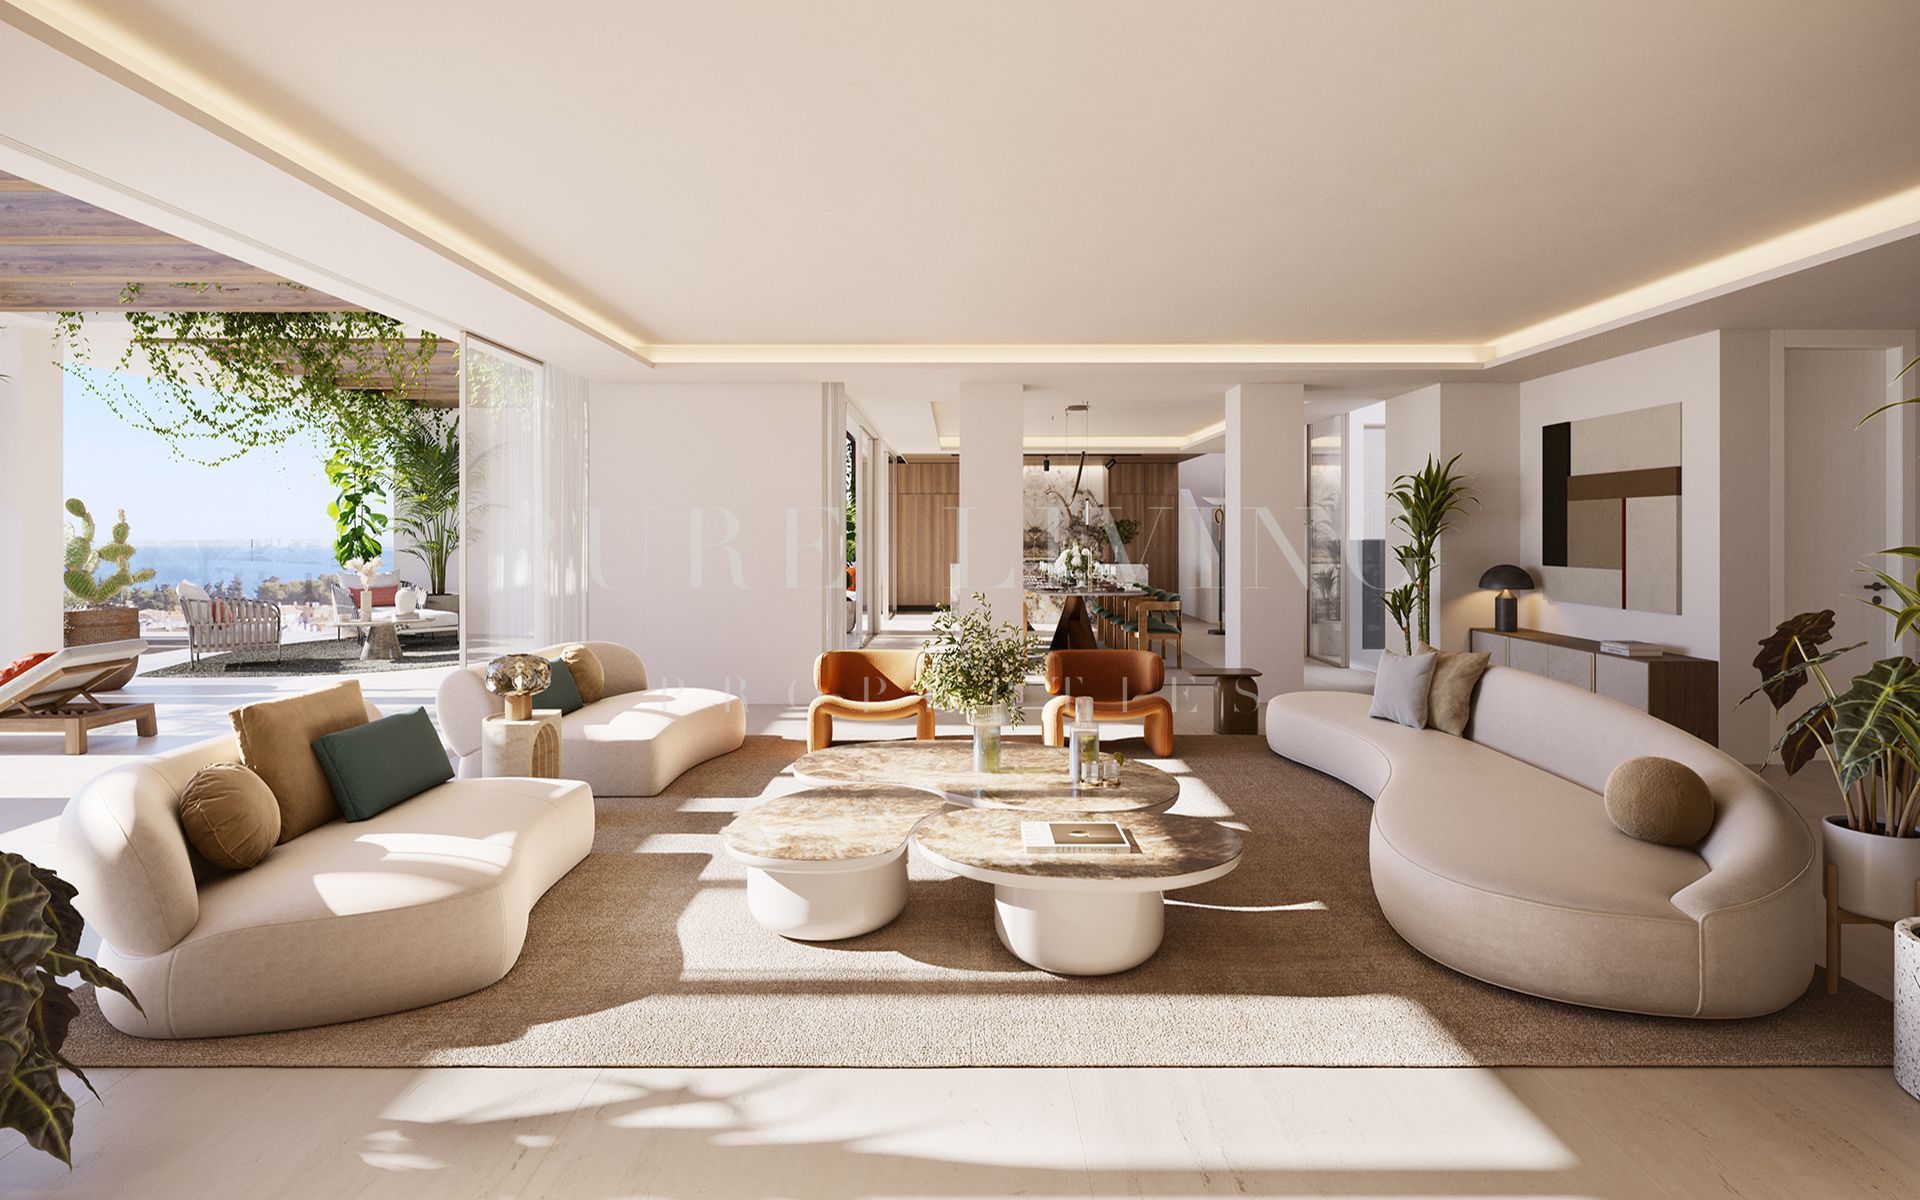 Penthouse in EARTH, newest project on Marbella's Golden Mile offering premier luxury living